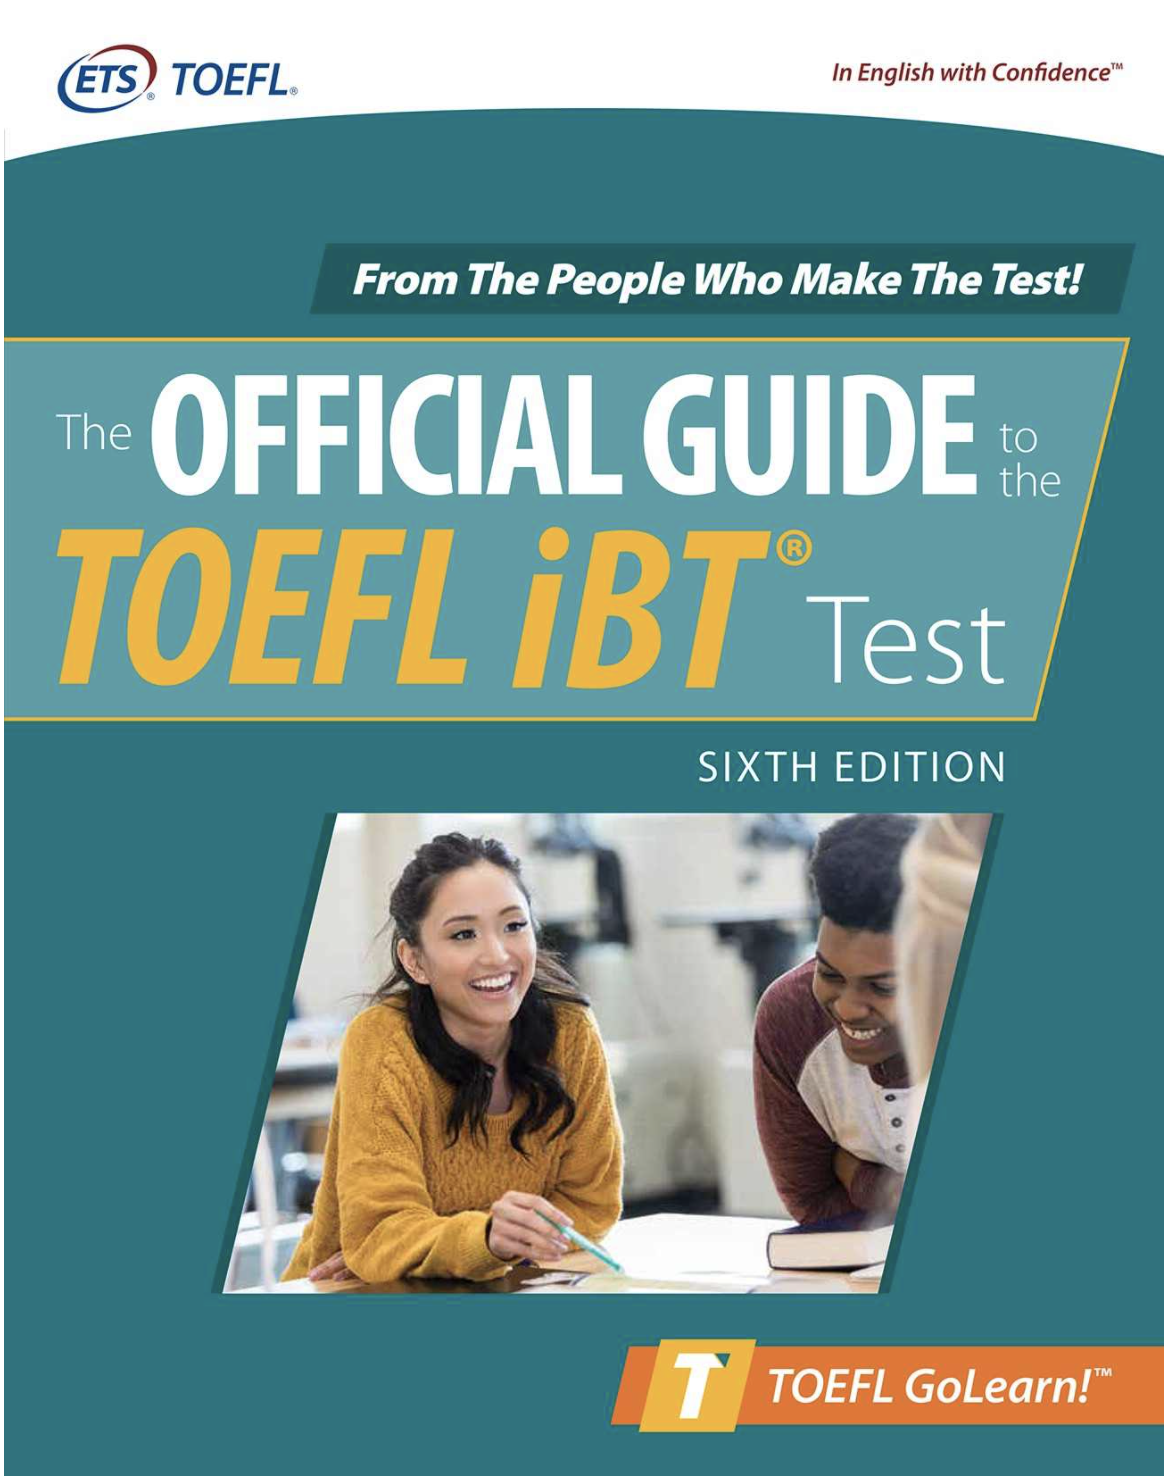 The Official Guide to the TOEFL iBT Test book cover